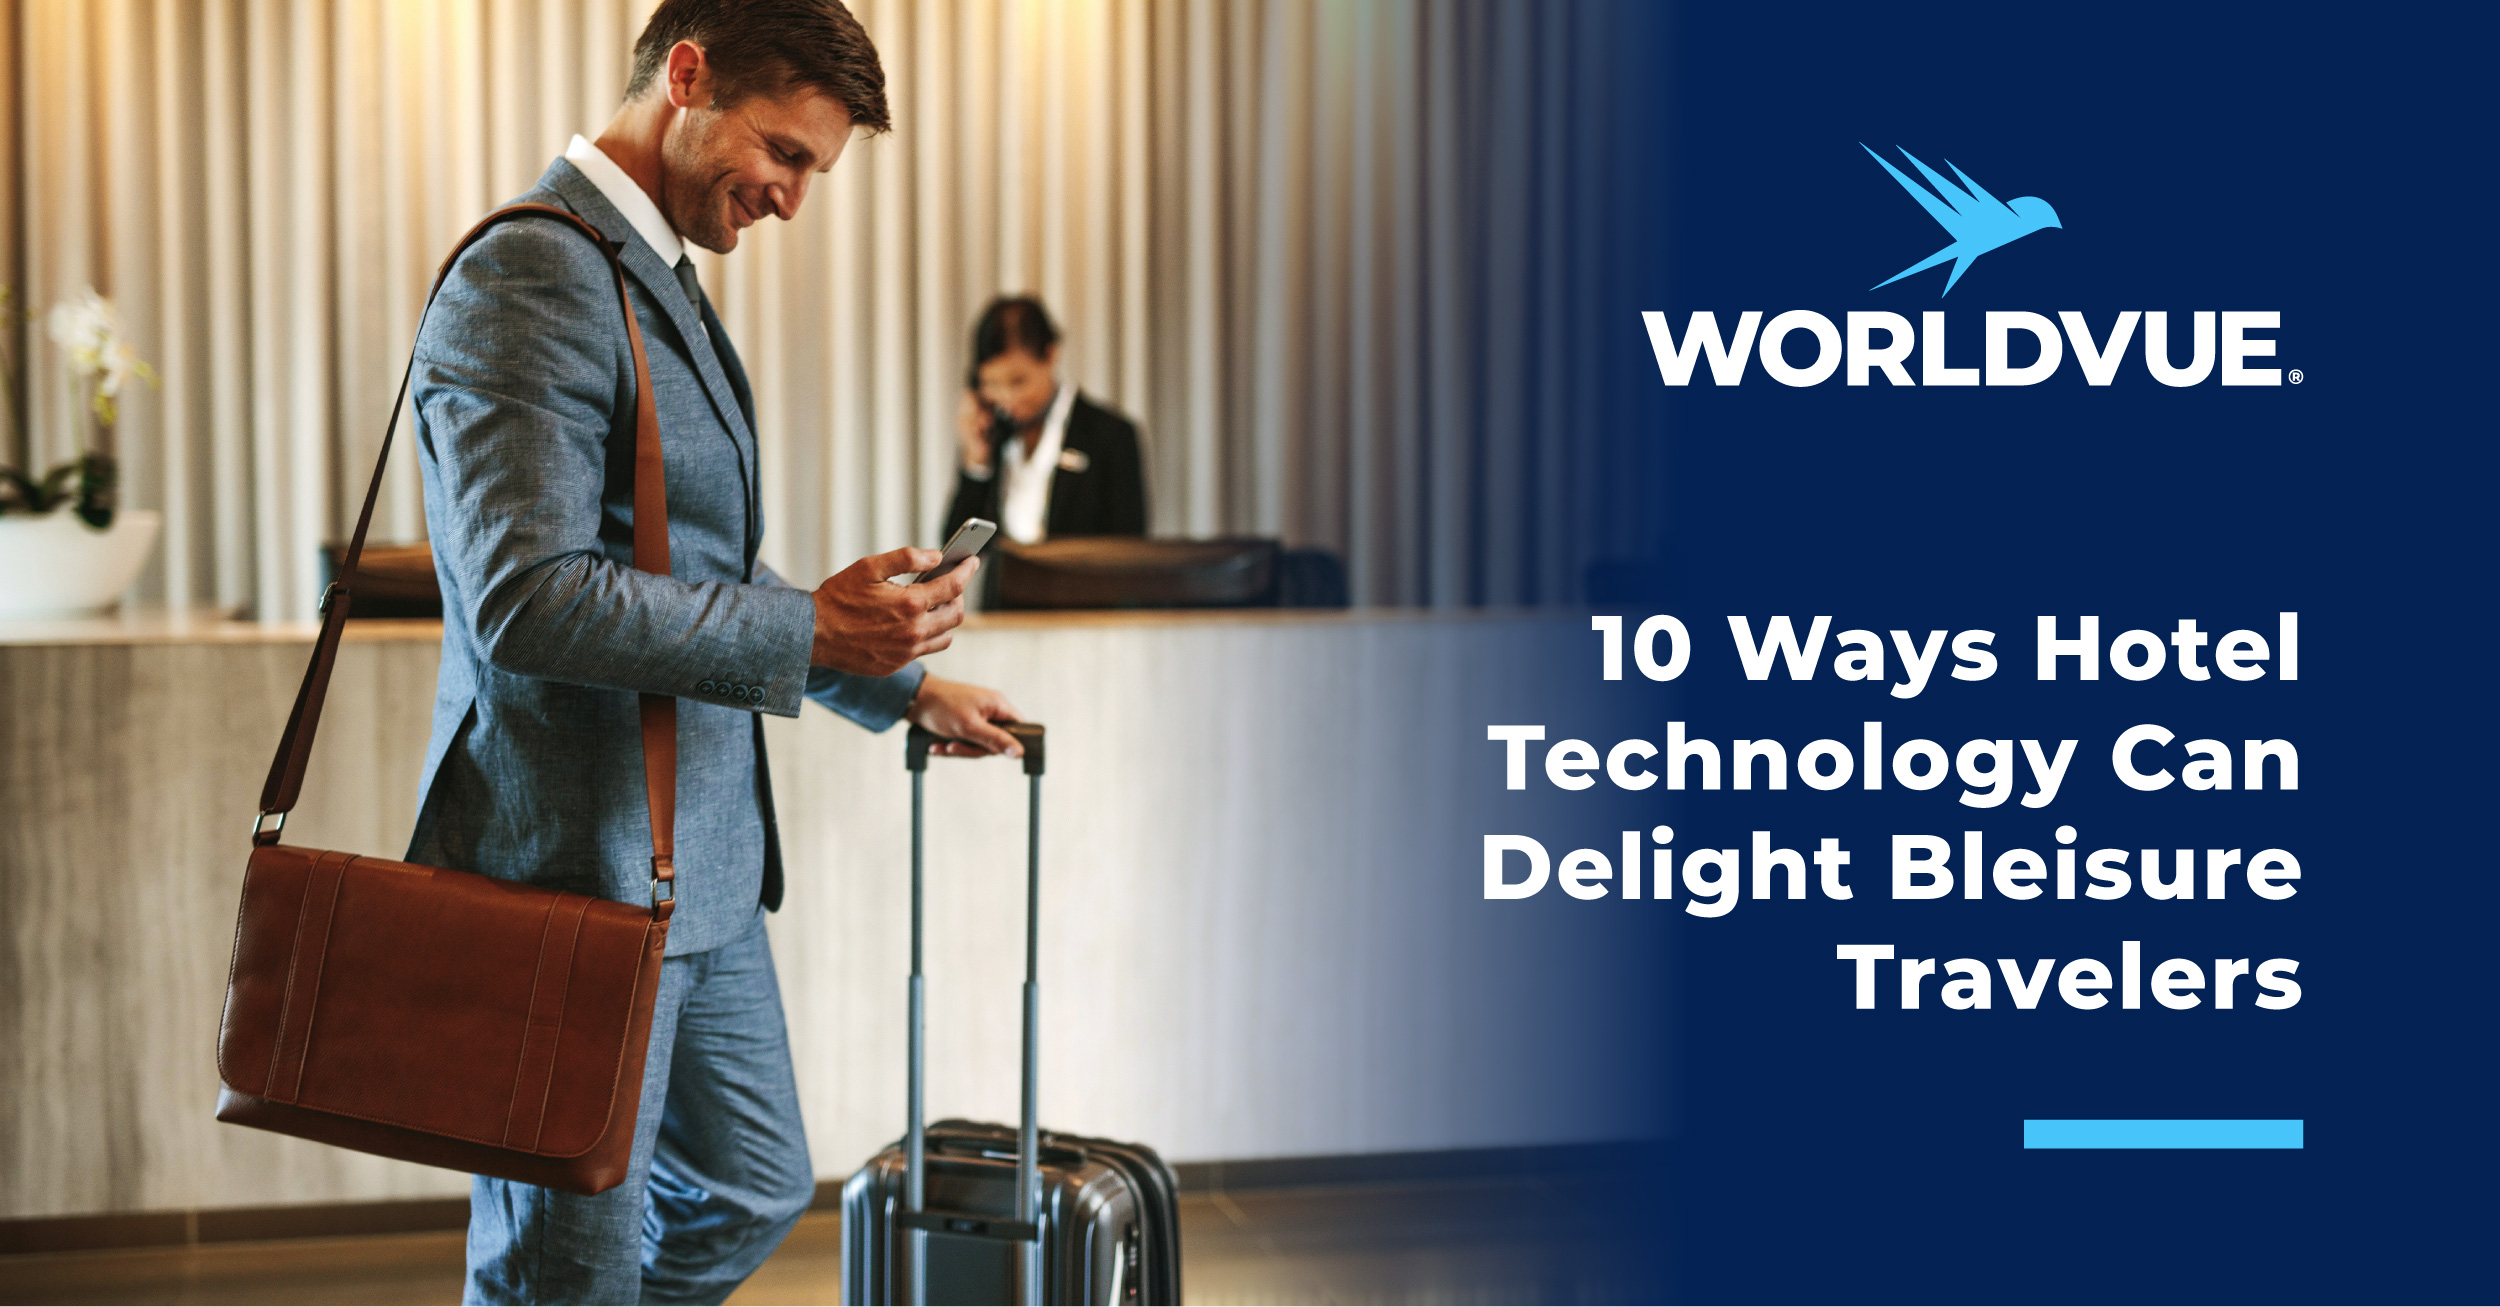 image of bleisure traveler walking through lobby with suitcase and mobile phone, with WorldVue logo and text "10 Ways Hotel Technology Can Delight Bleisure Travelers"